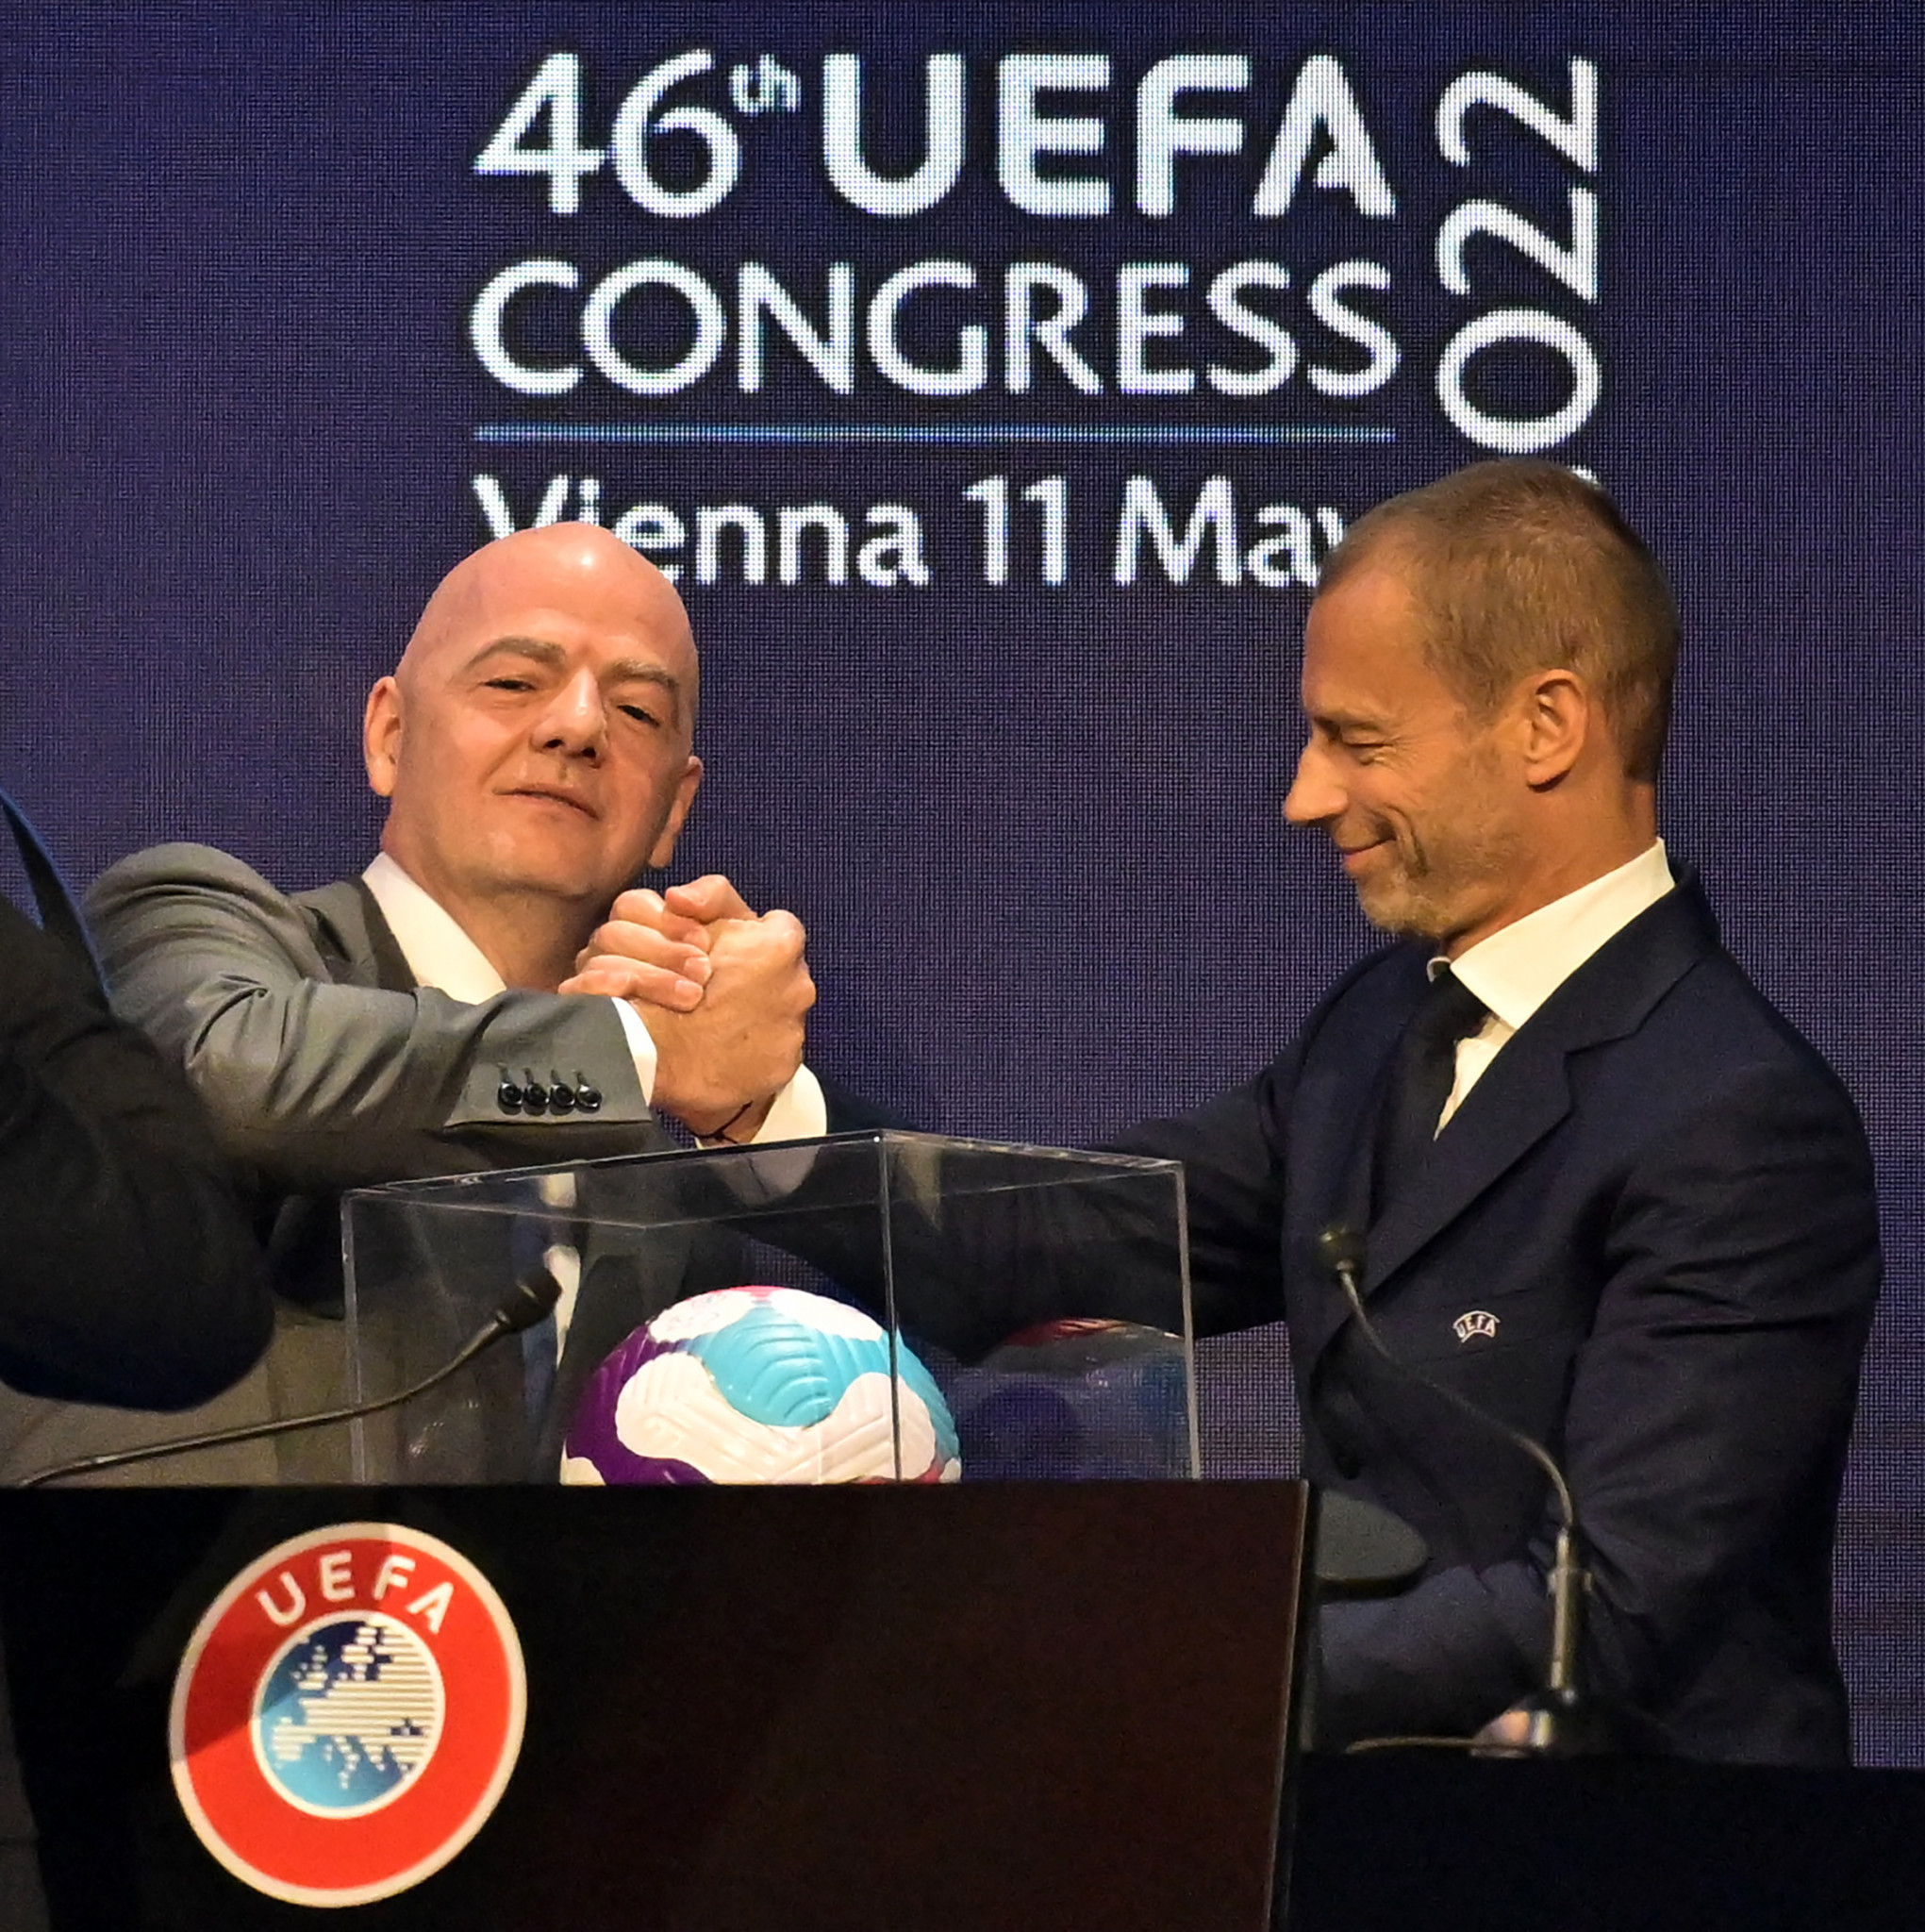 UEFA President Aleksander Čeferin, right, had held contrasting views to his FIFA counterpart Gianni Infantino, left, on proposals for a biennial World Cup ©Getty Images